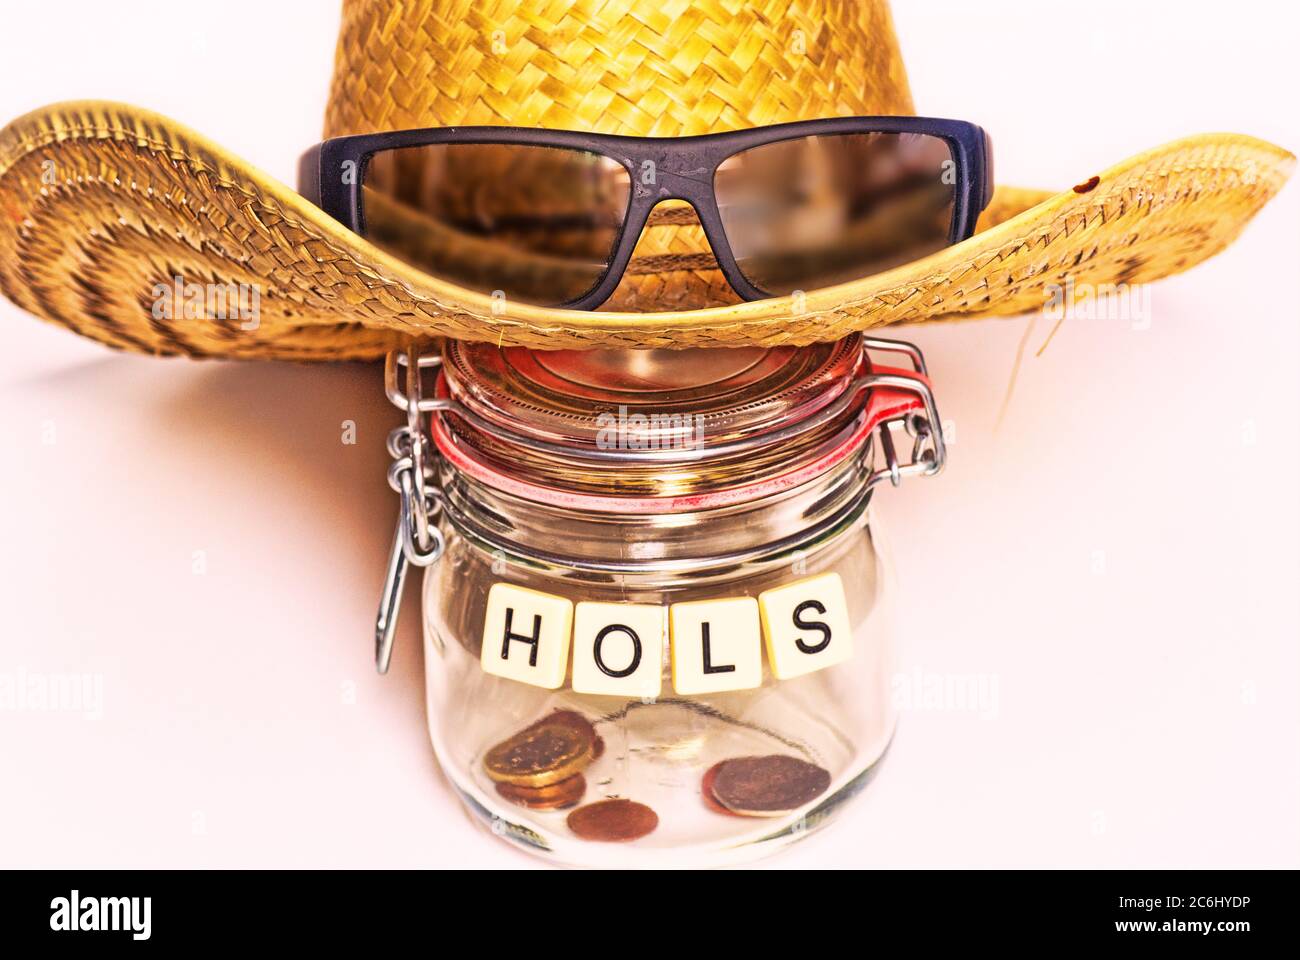 Financial concept image. Cost of  Covid 19 to economy and savings.  Almost empty jar for holiday savings. Holiday hat, sun glasses.   None. Poverty. Stock Photo